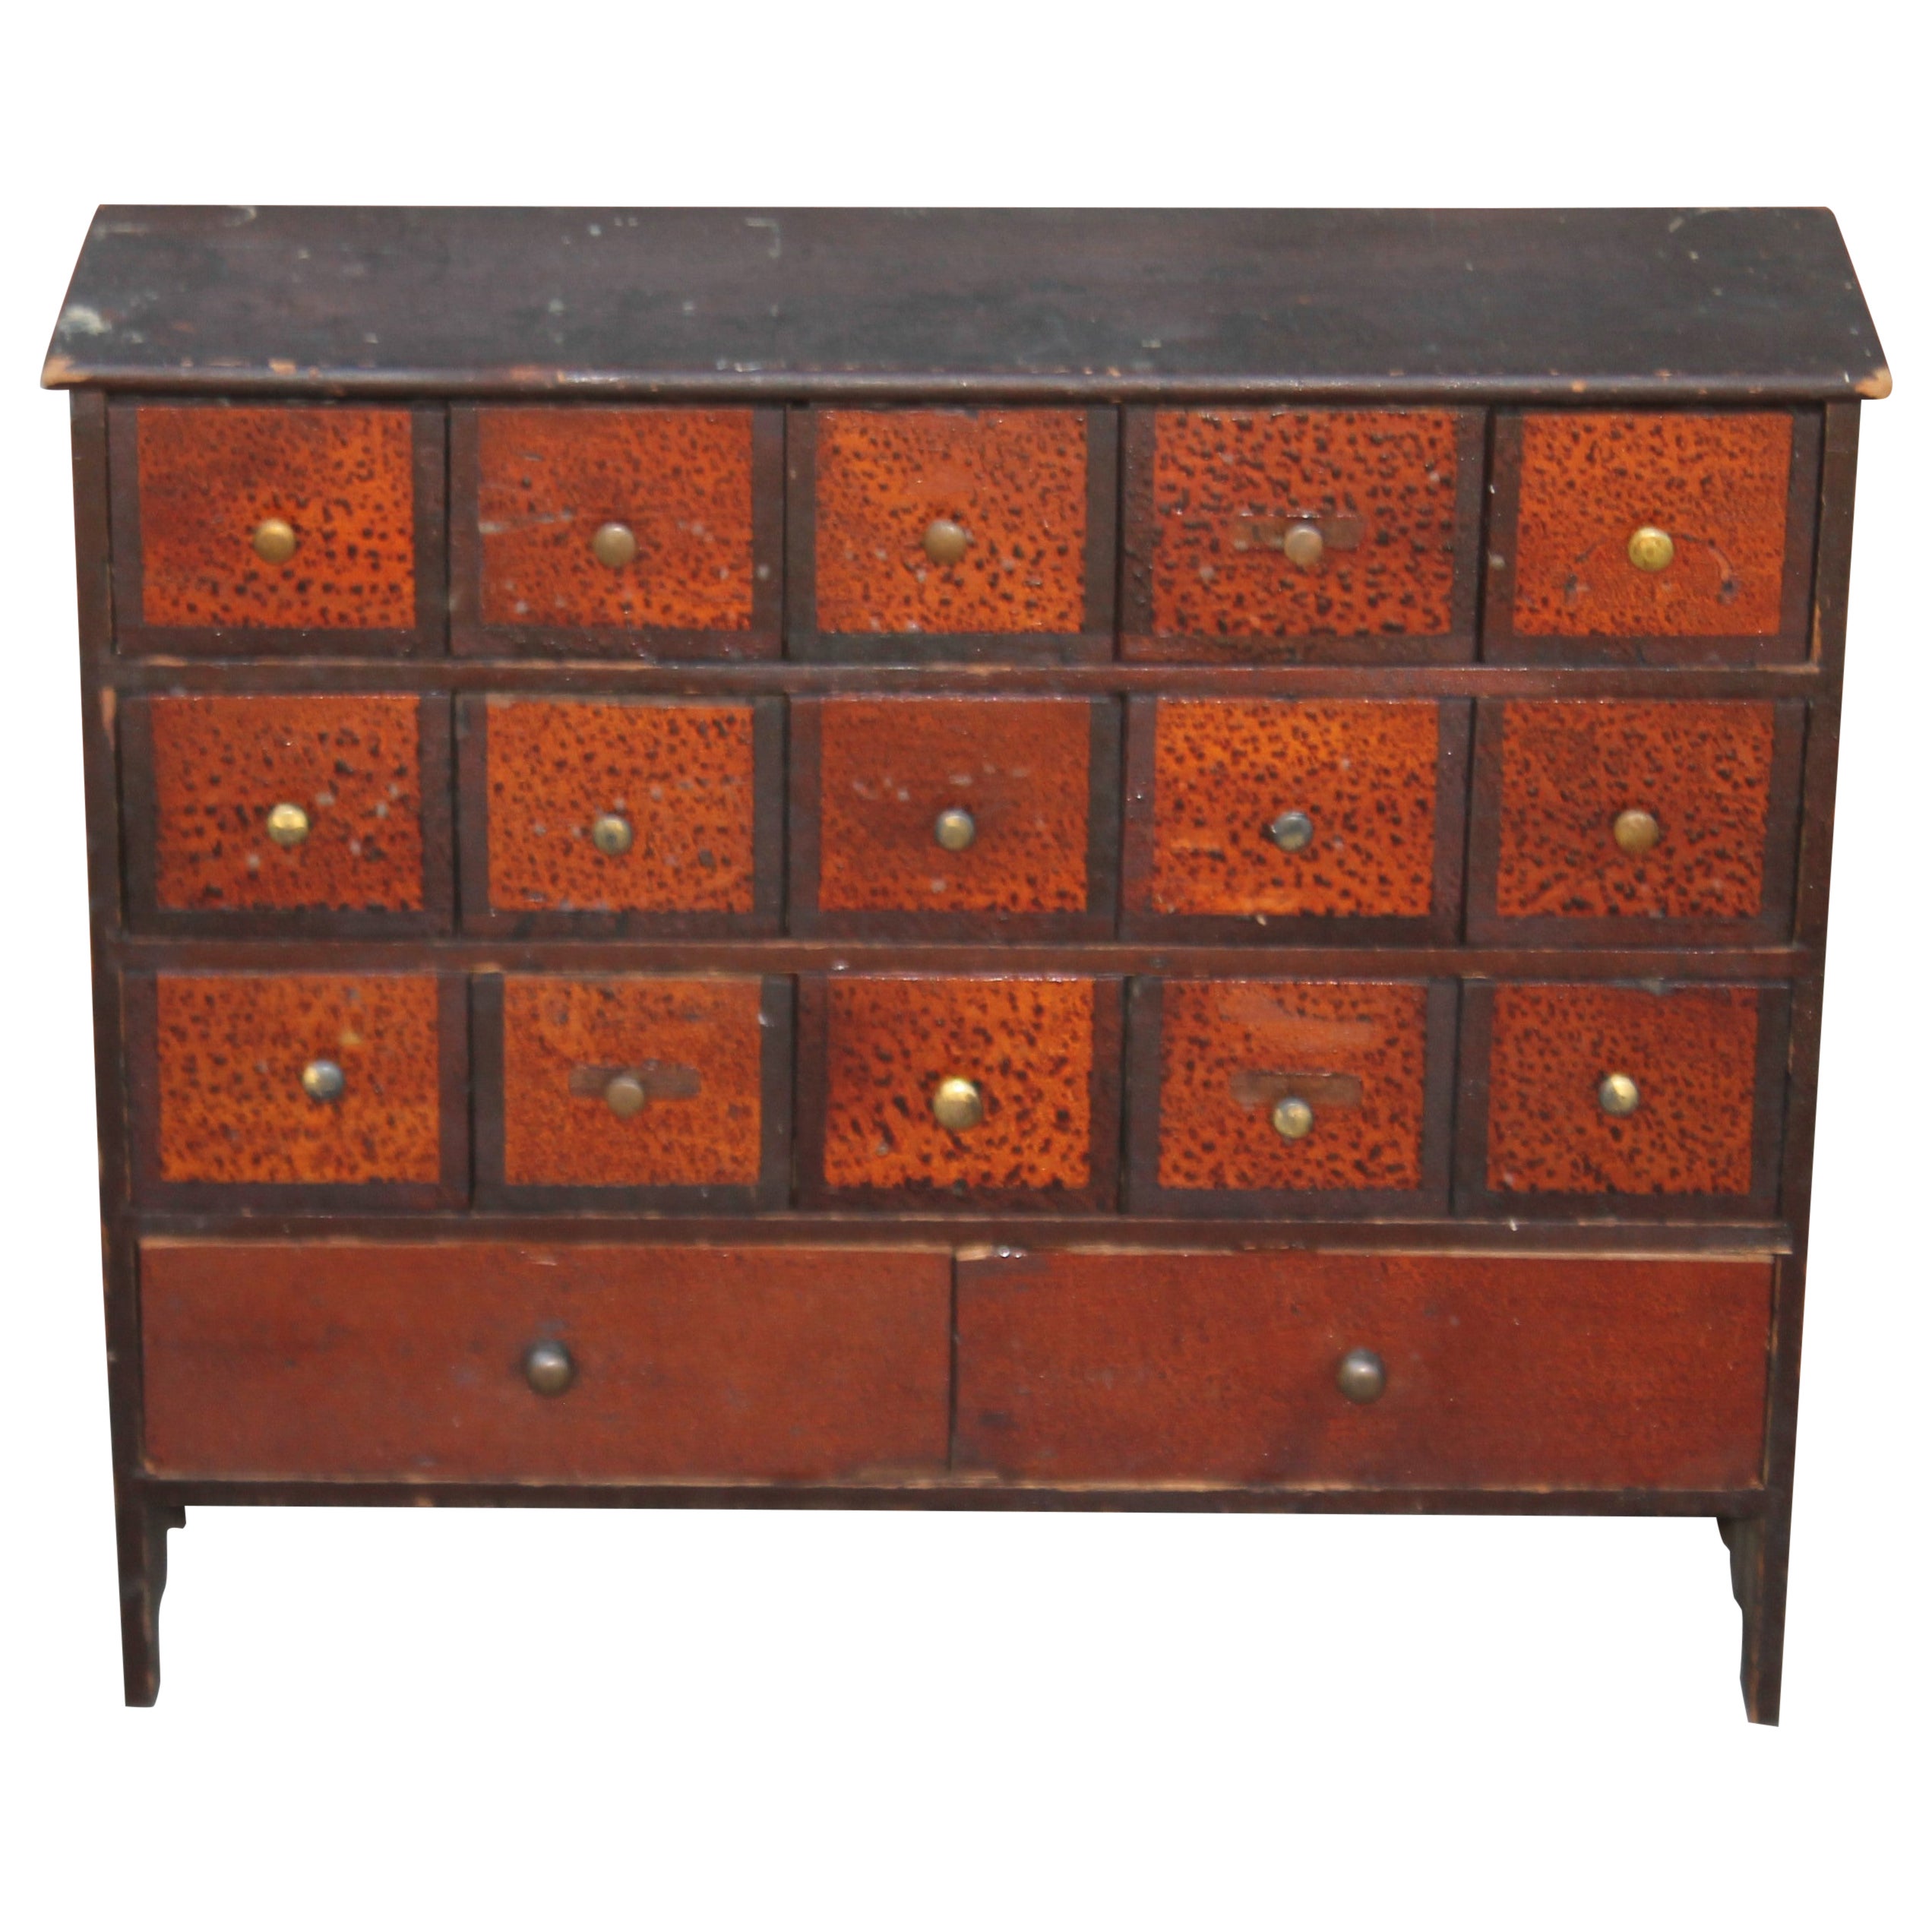 19thc Original Painted Apothecary Cabinet with 17 Drawers For Sale